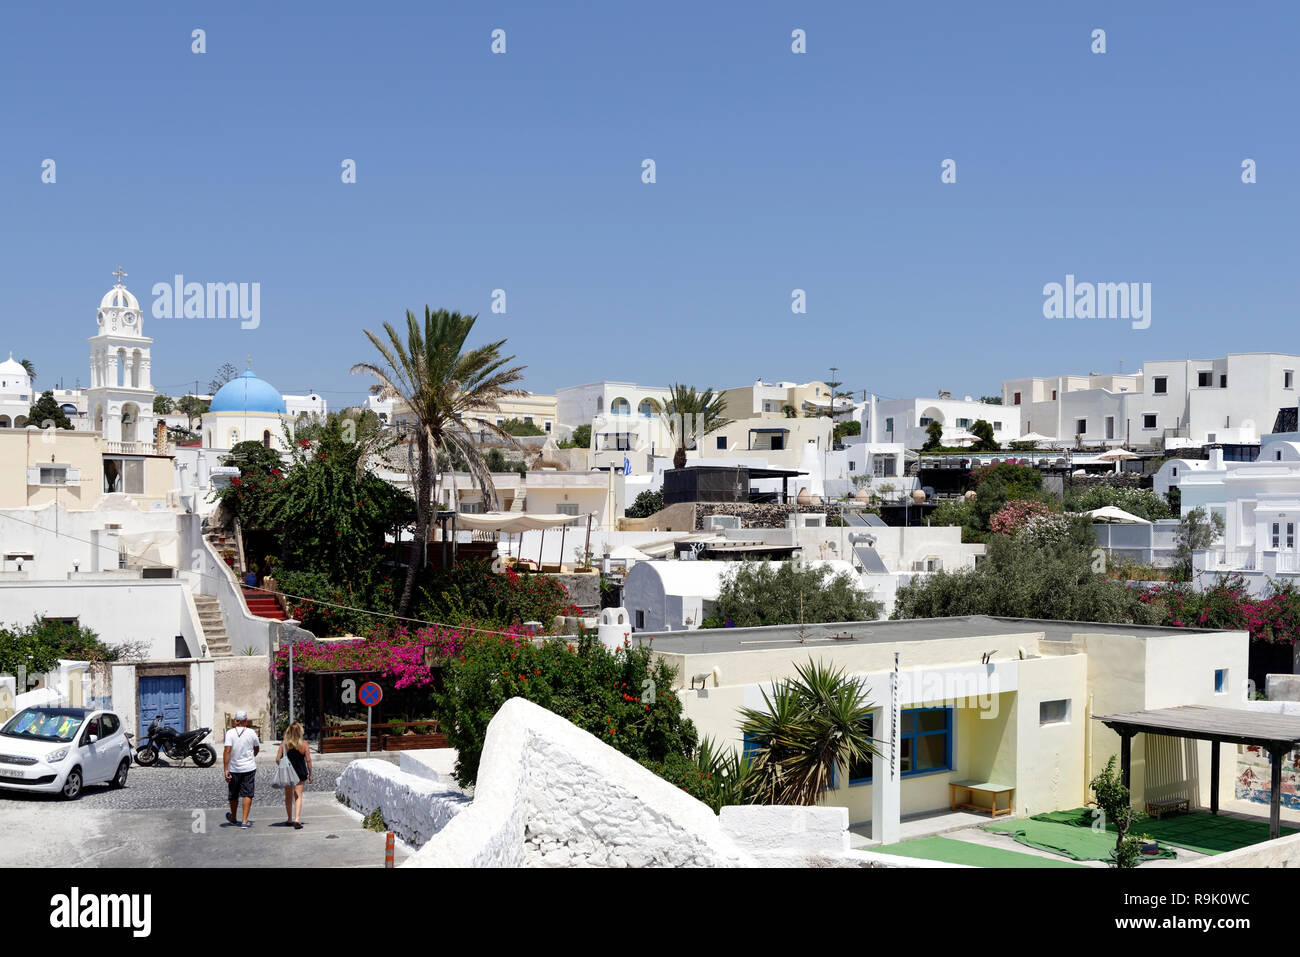 Church domes and belltowers and whitewashed buildings dominate the skyline of the village of Megalochori, Santorini, Greece. Stock Photo